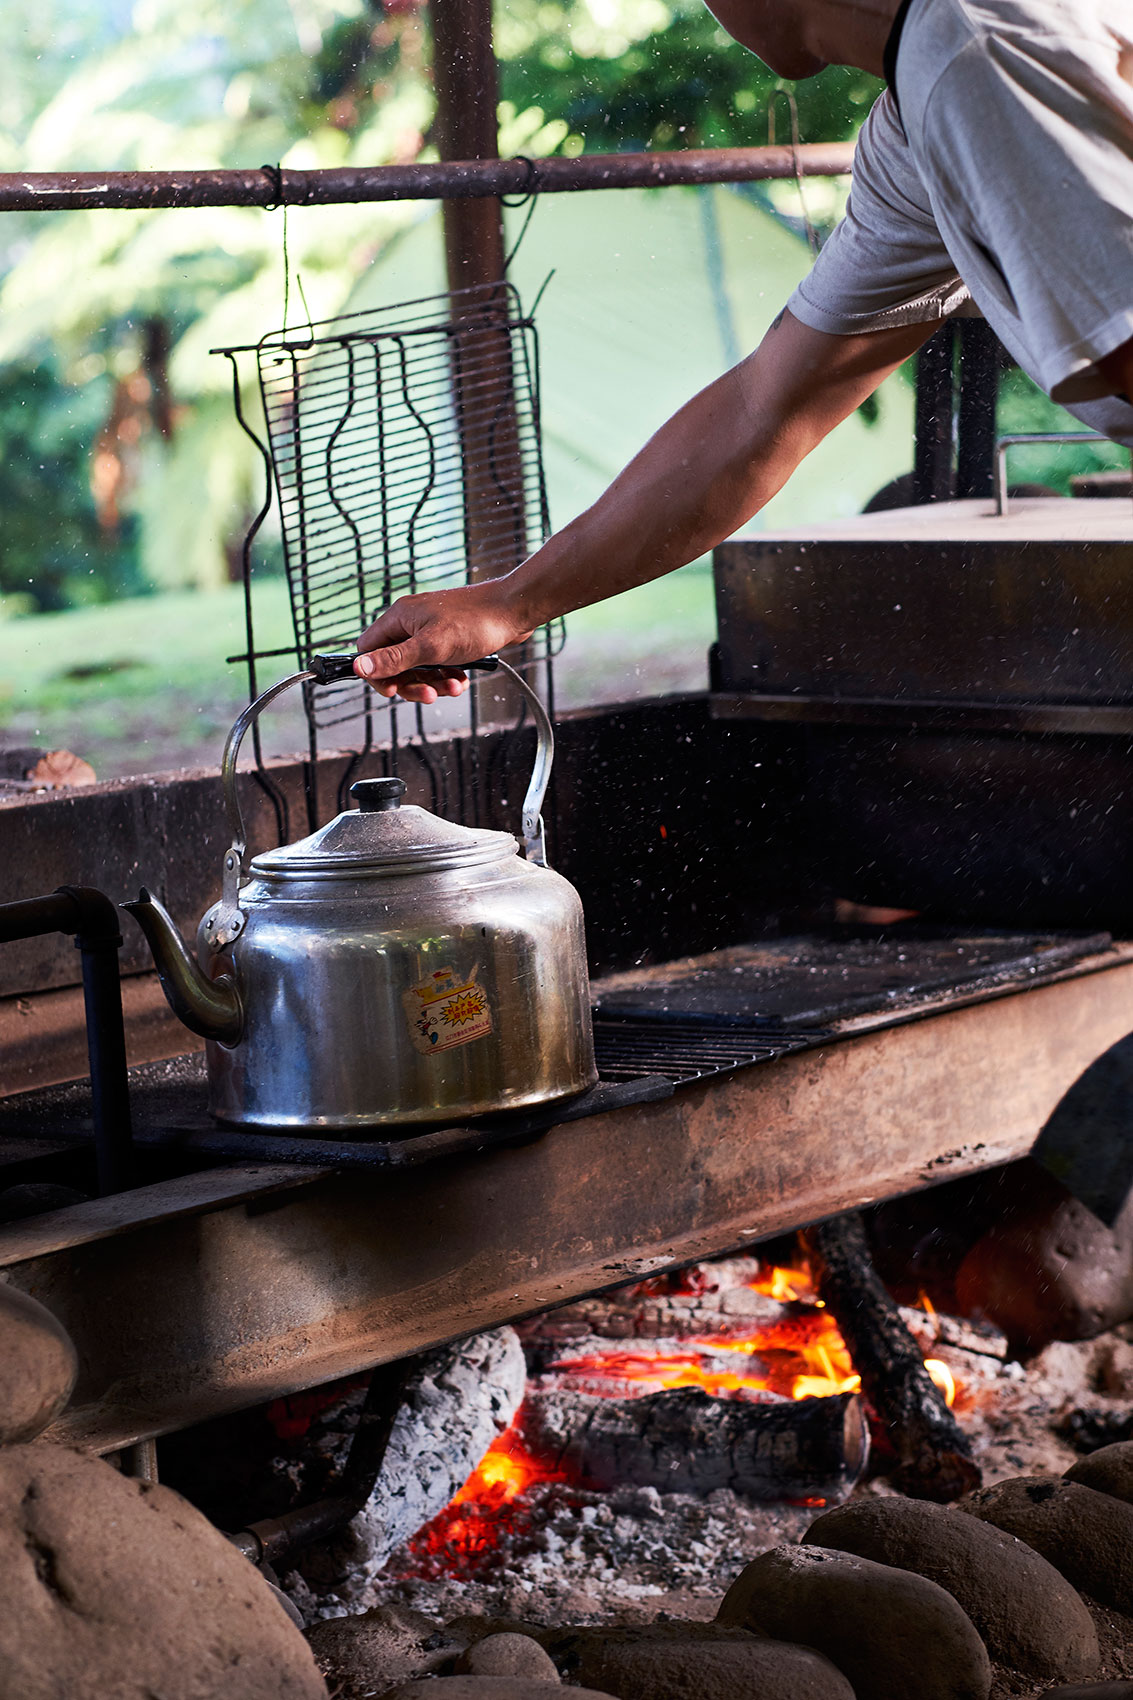 Hiakai • Boiling Billycan Kettle Over Hot Wood Fire • Lifestyle & Hospitality Food Photography